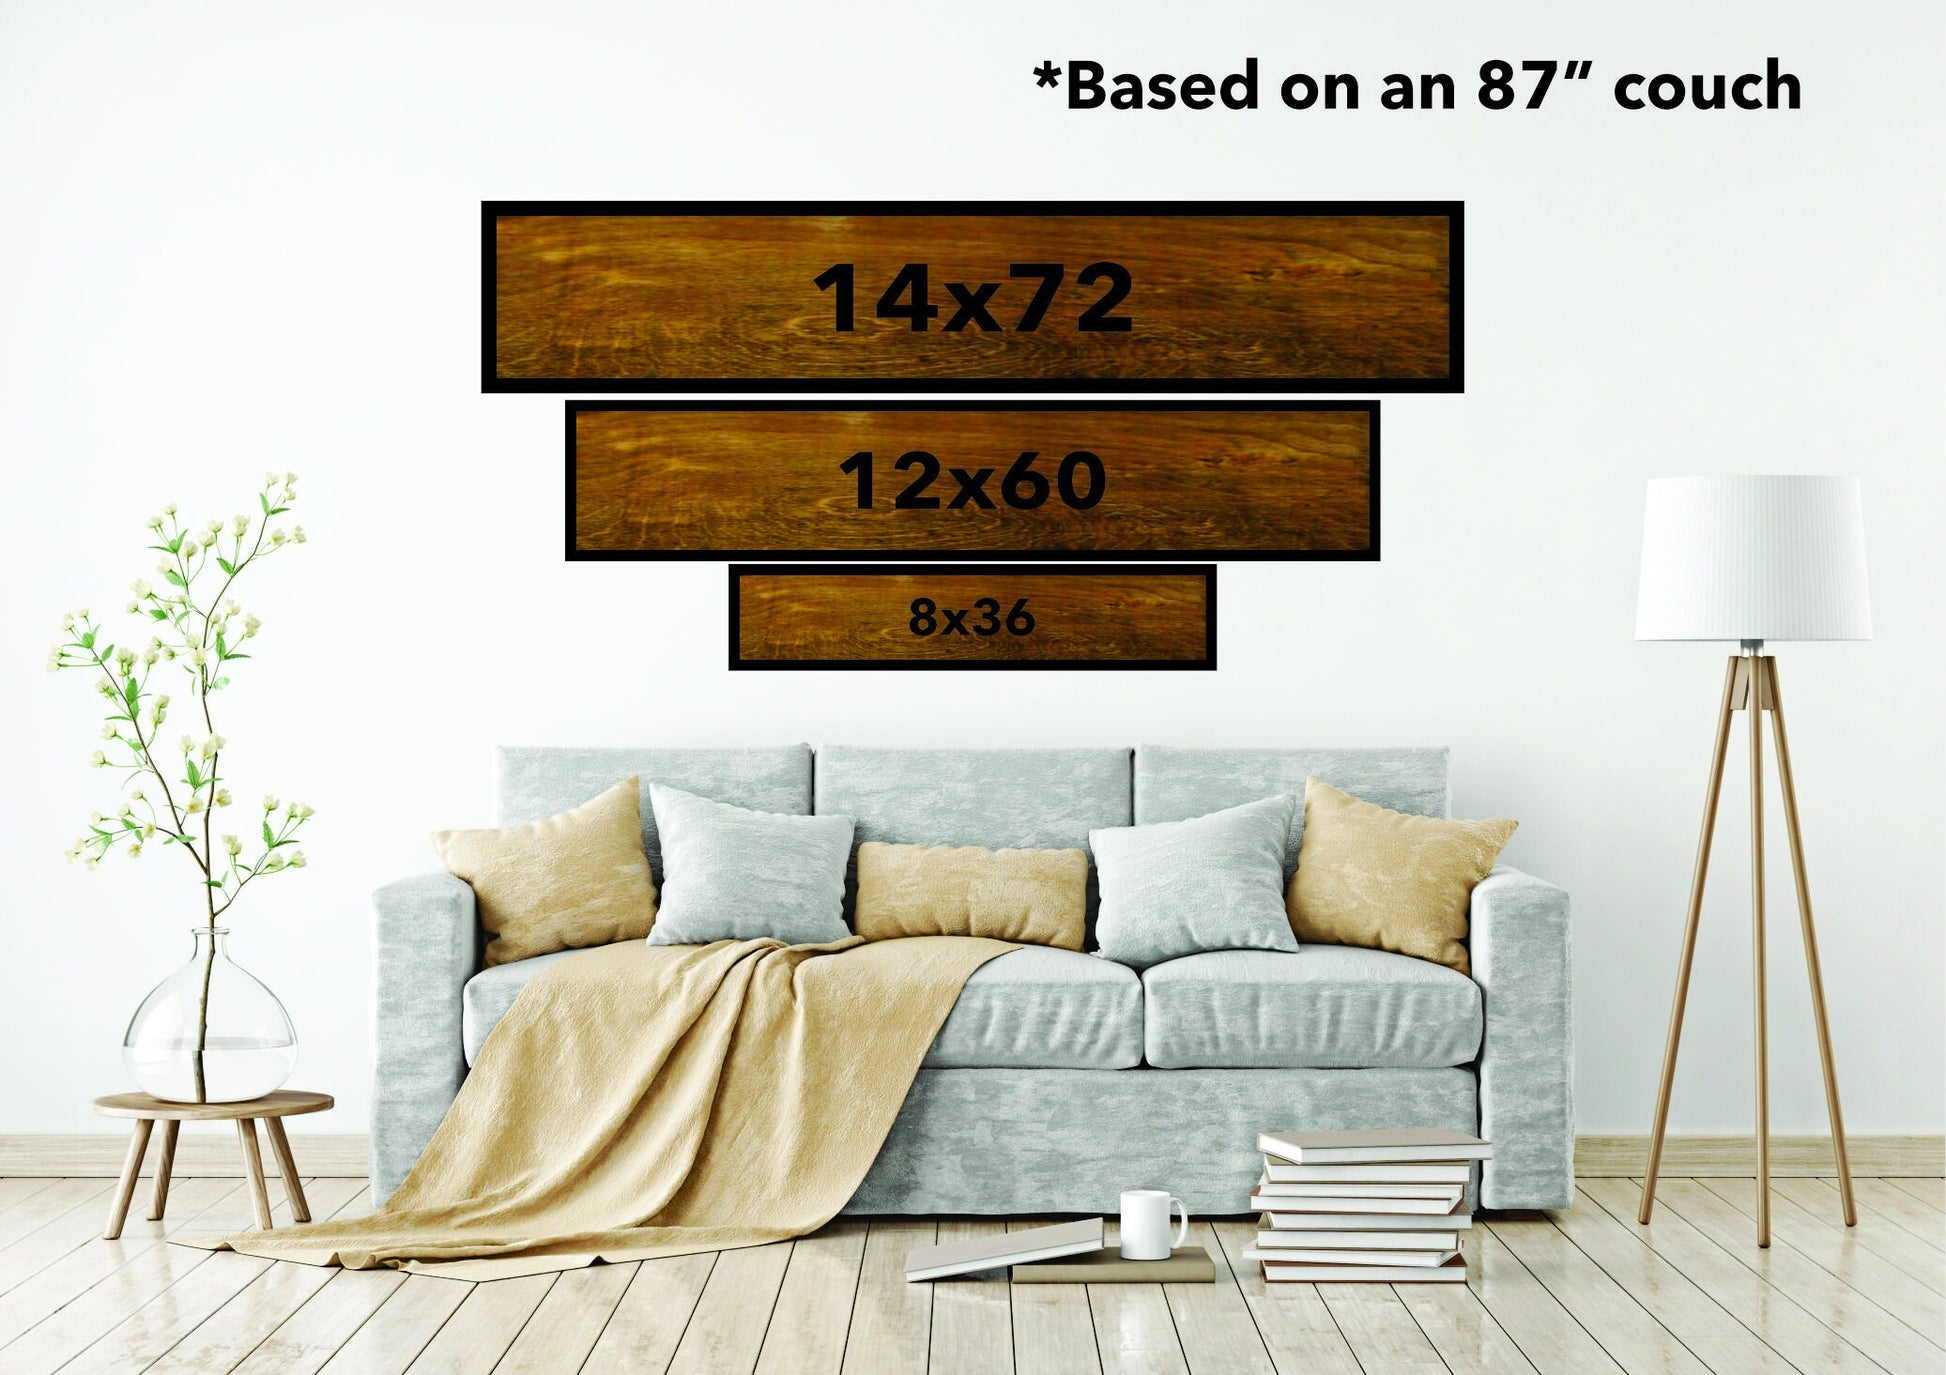 Large Custom Raised Text Sign Over-sized Rustic Your Business Logo Wood Double Boarder Framed Laser Cut Out 3D Manor House Entry Way